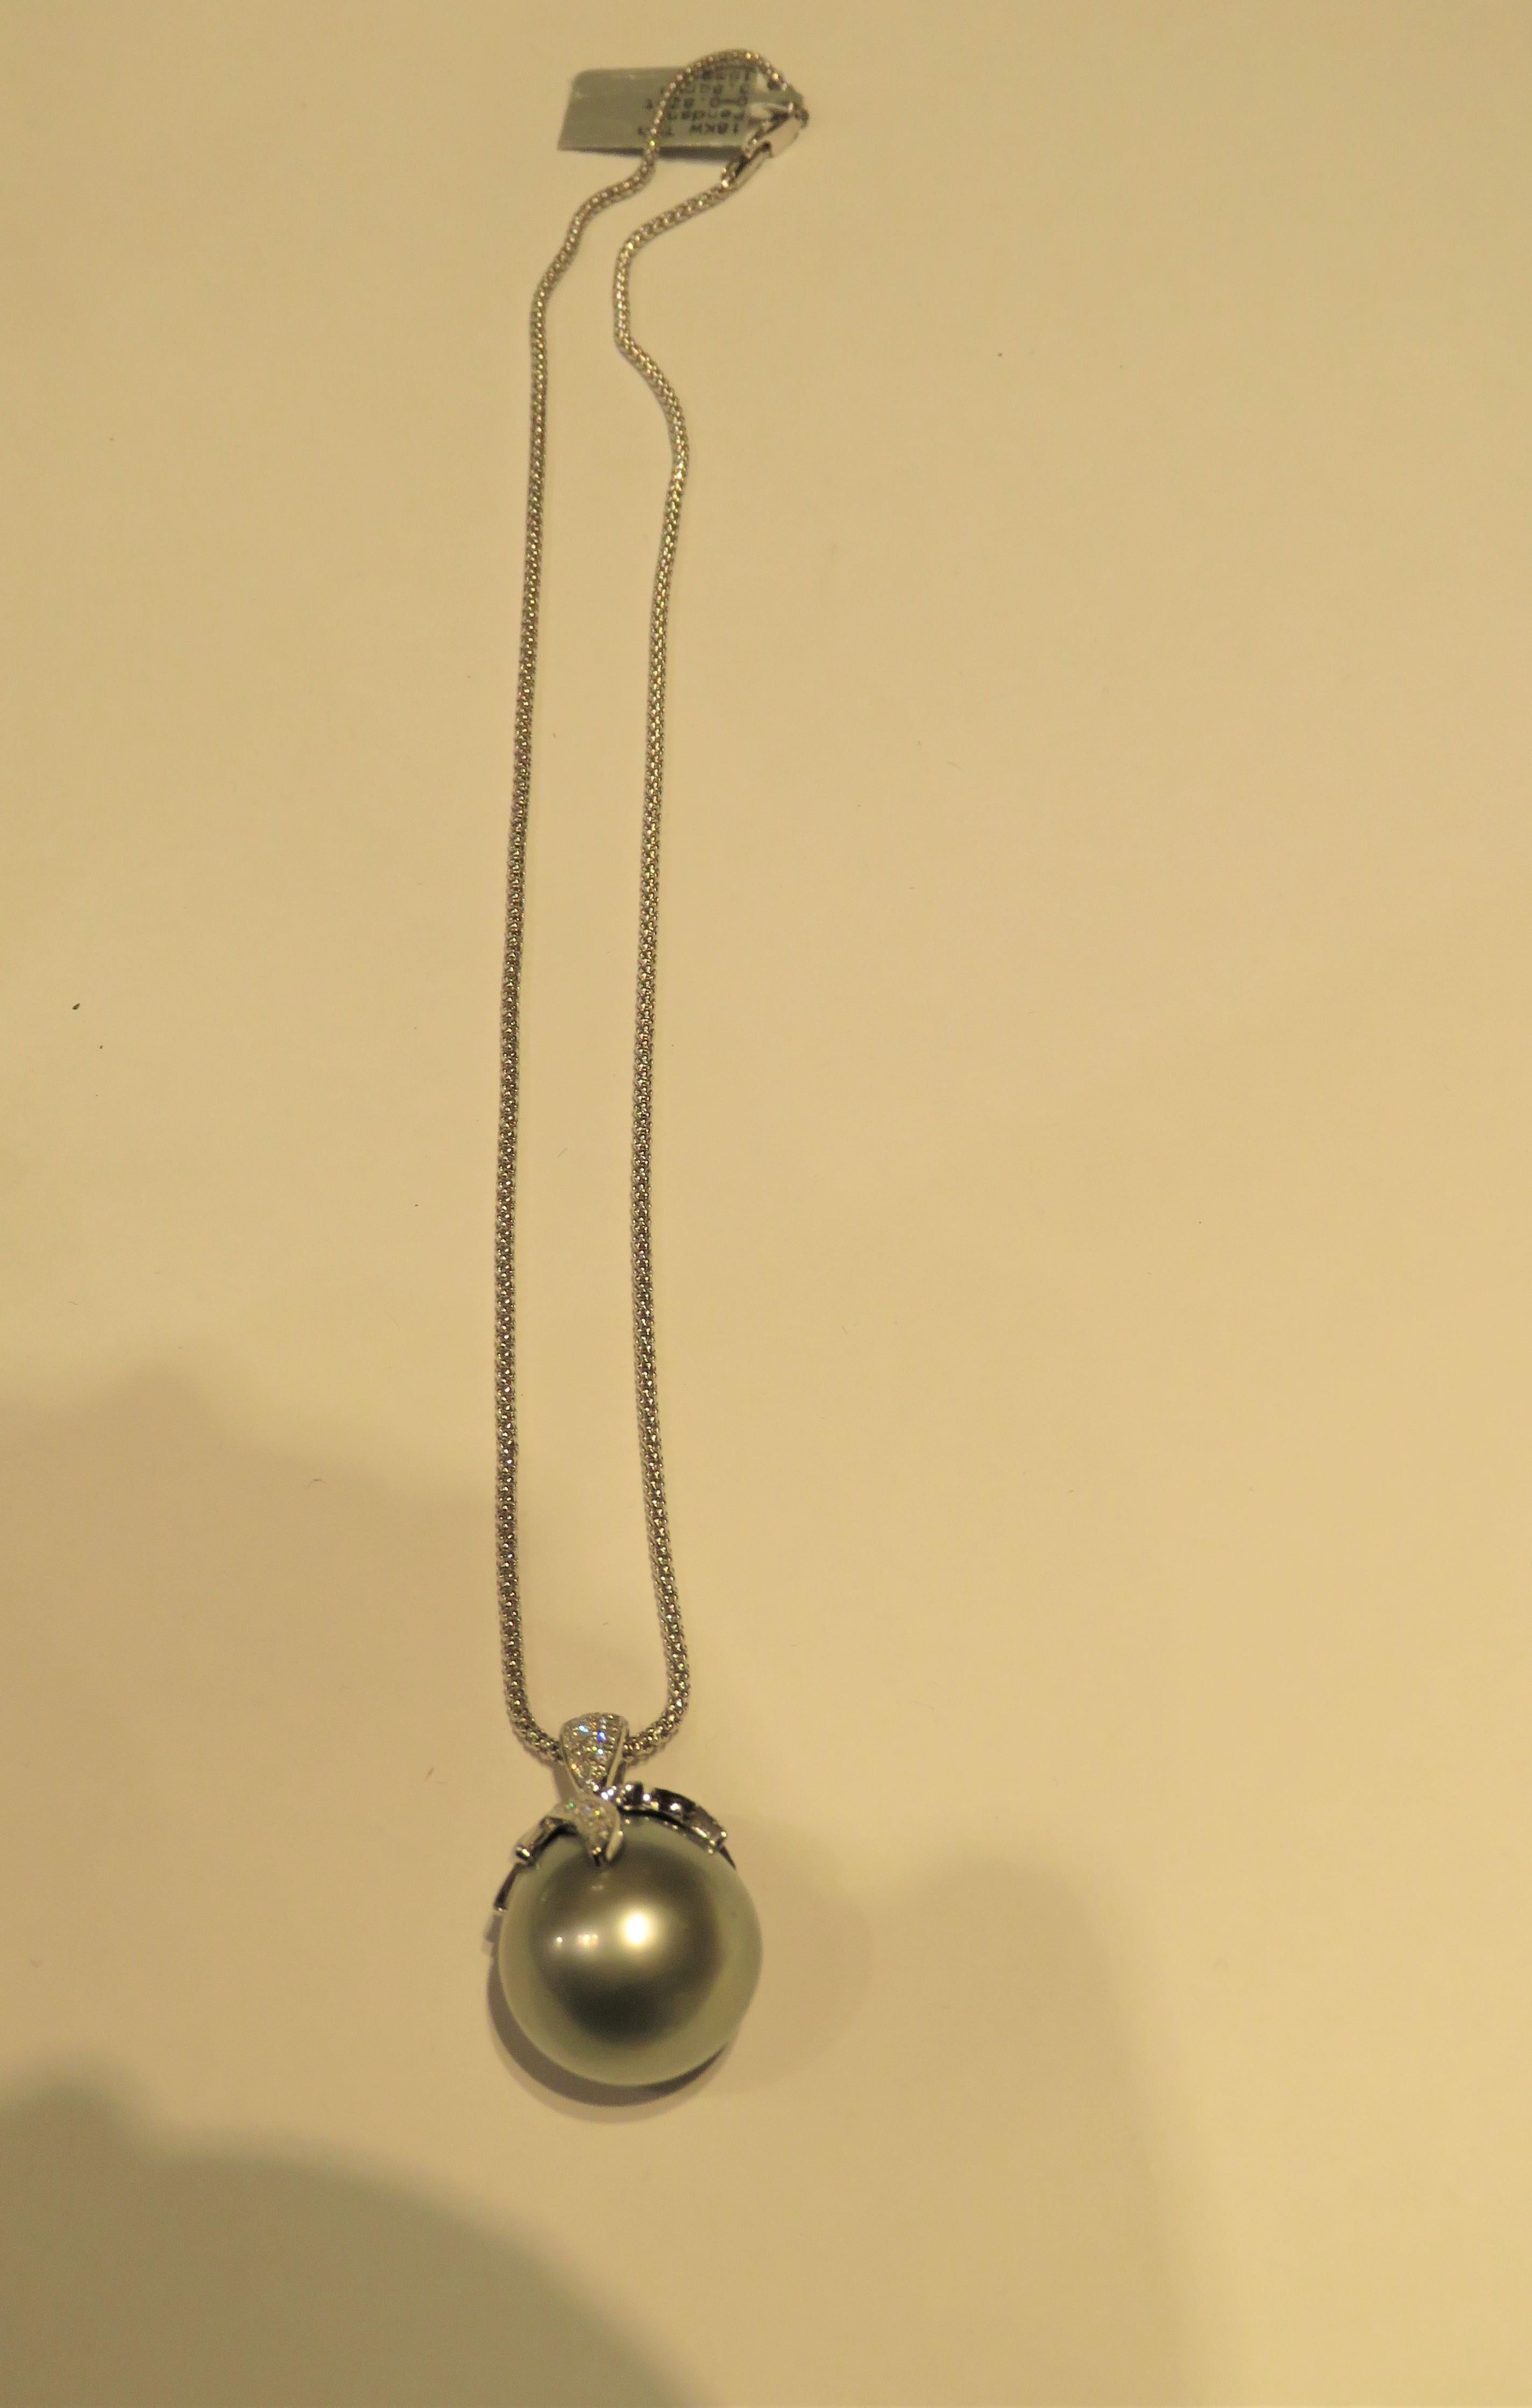 The Following Item we are offering are these Extremely Rare Beautiful 18KT White Gold Fine Large South Sea Tahitian Pearl Pendant comprised of approx. 1CT of Fine Fancy Glittering Diamonds!! This Extremely Rare Gorgeous Pearl is Highly Lustered